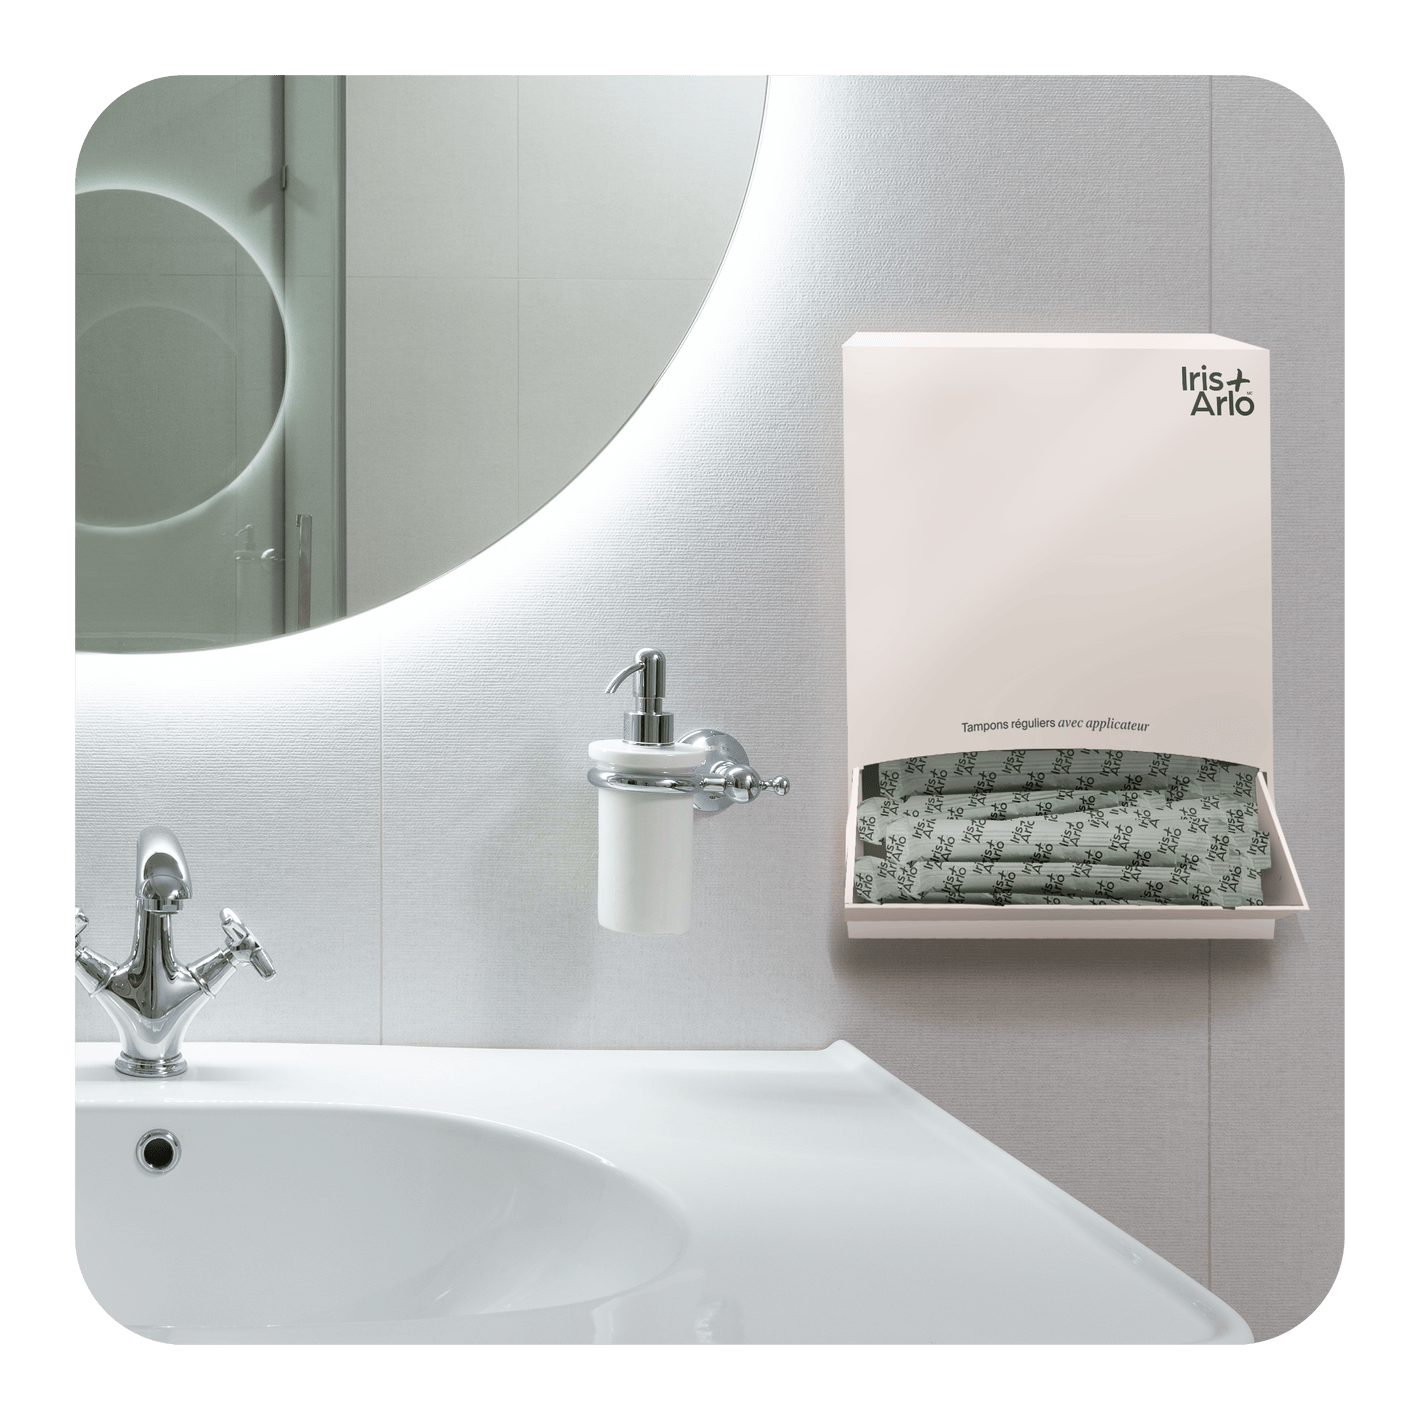 The Iris + Arlo carton tampon dispenser is aesthetically pleasing and easy to hang on the wall in a corporate bathroom.